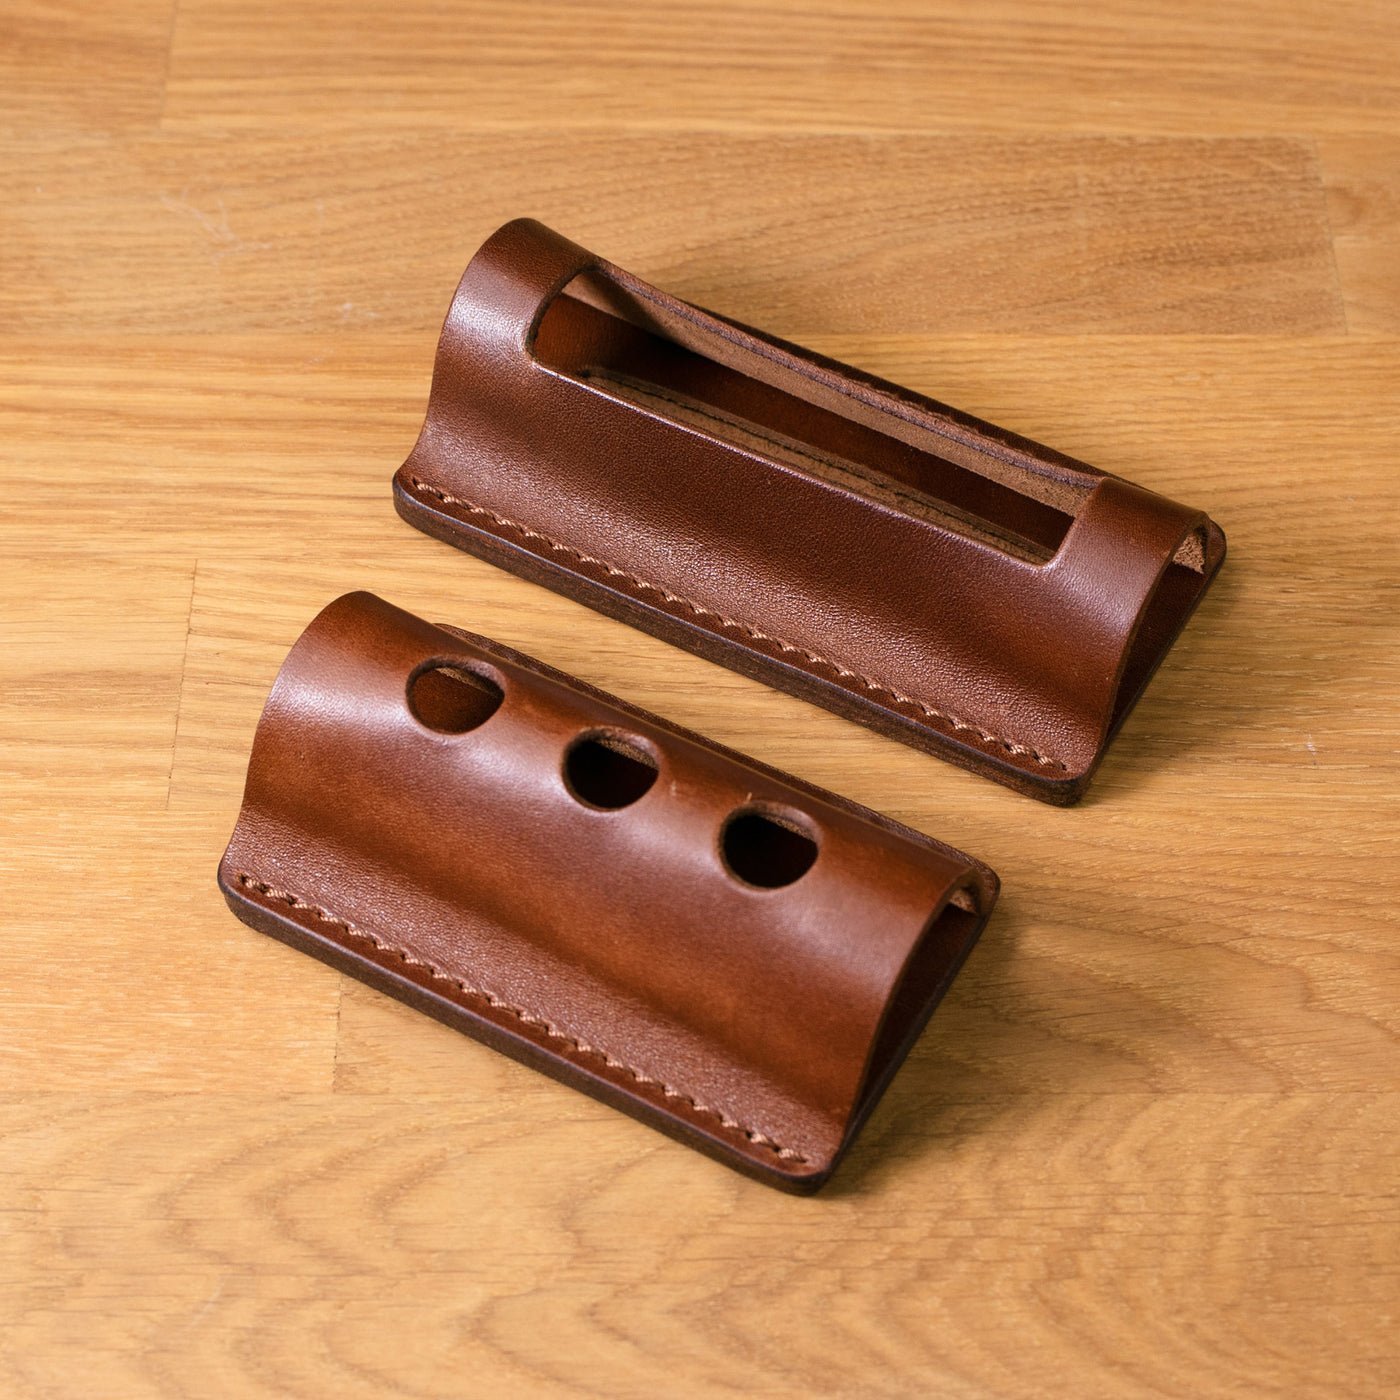 Pen and Business Card Leather Stands - Set of 2